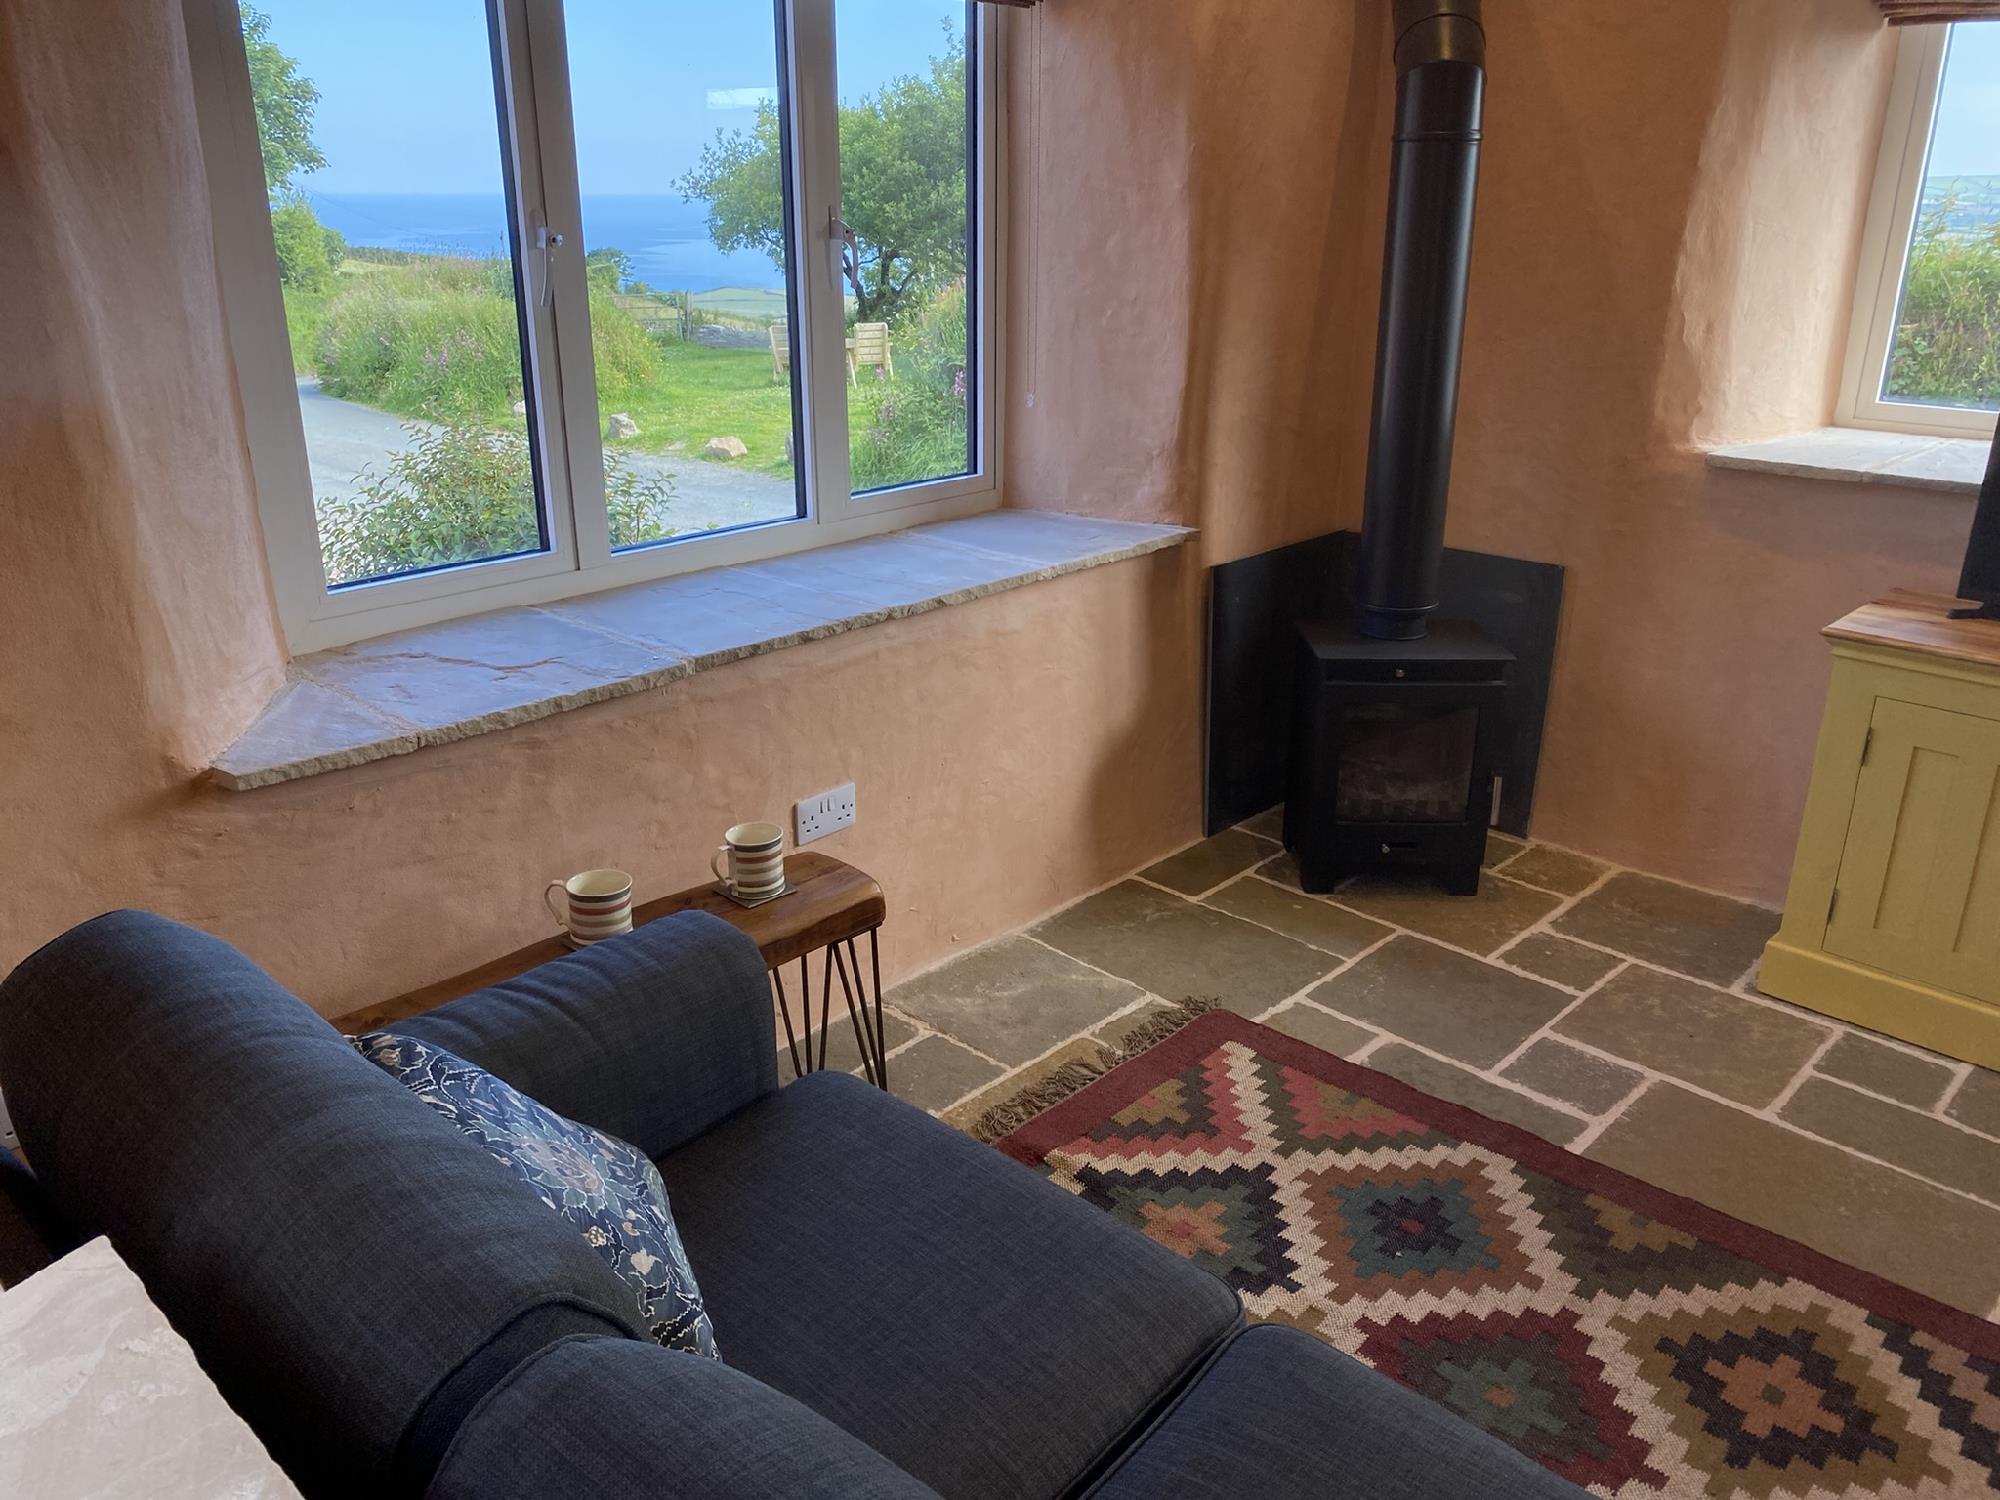 Sea views from your sofa at Blueberry Cottage Polrunny Farm holiday cottages Boscastle Cornwall